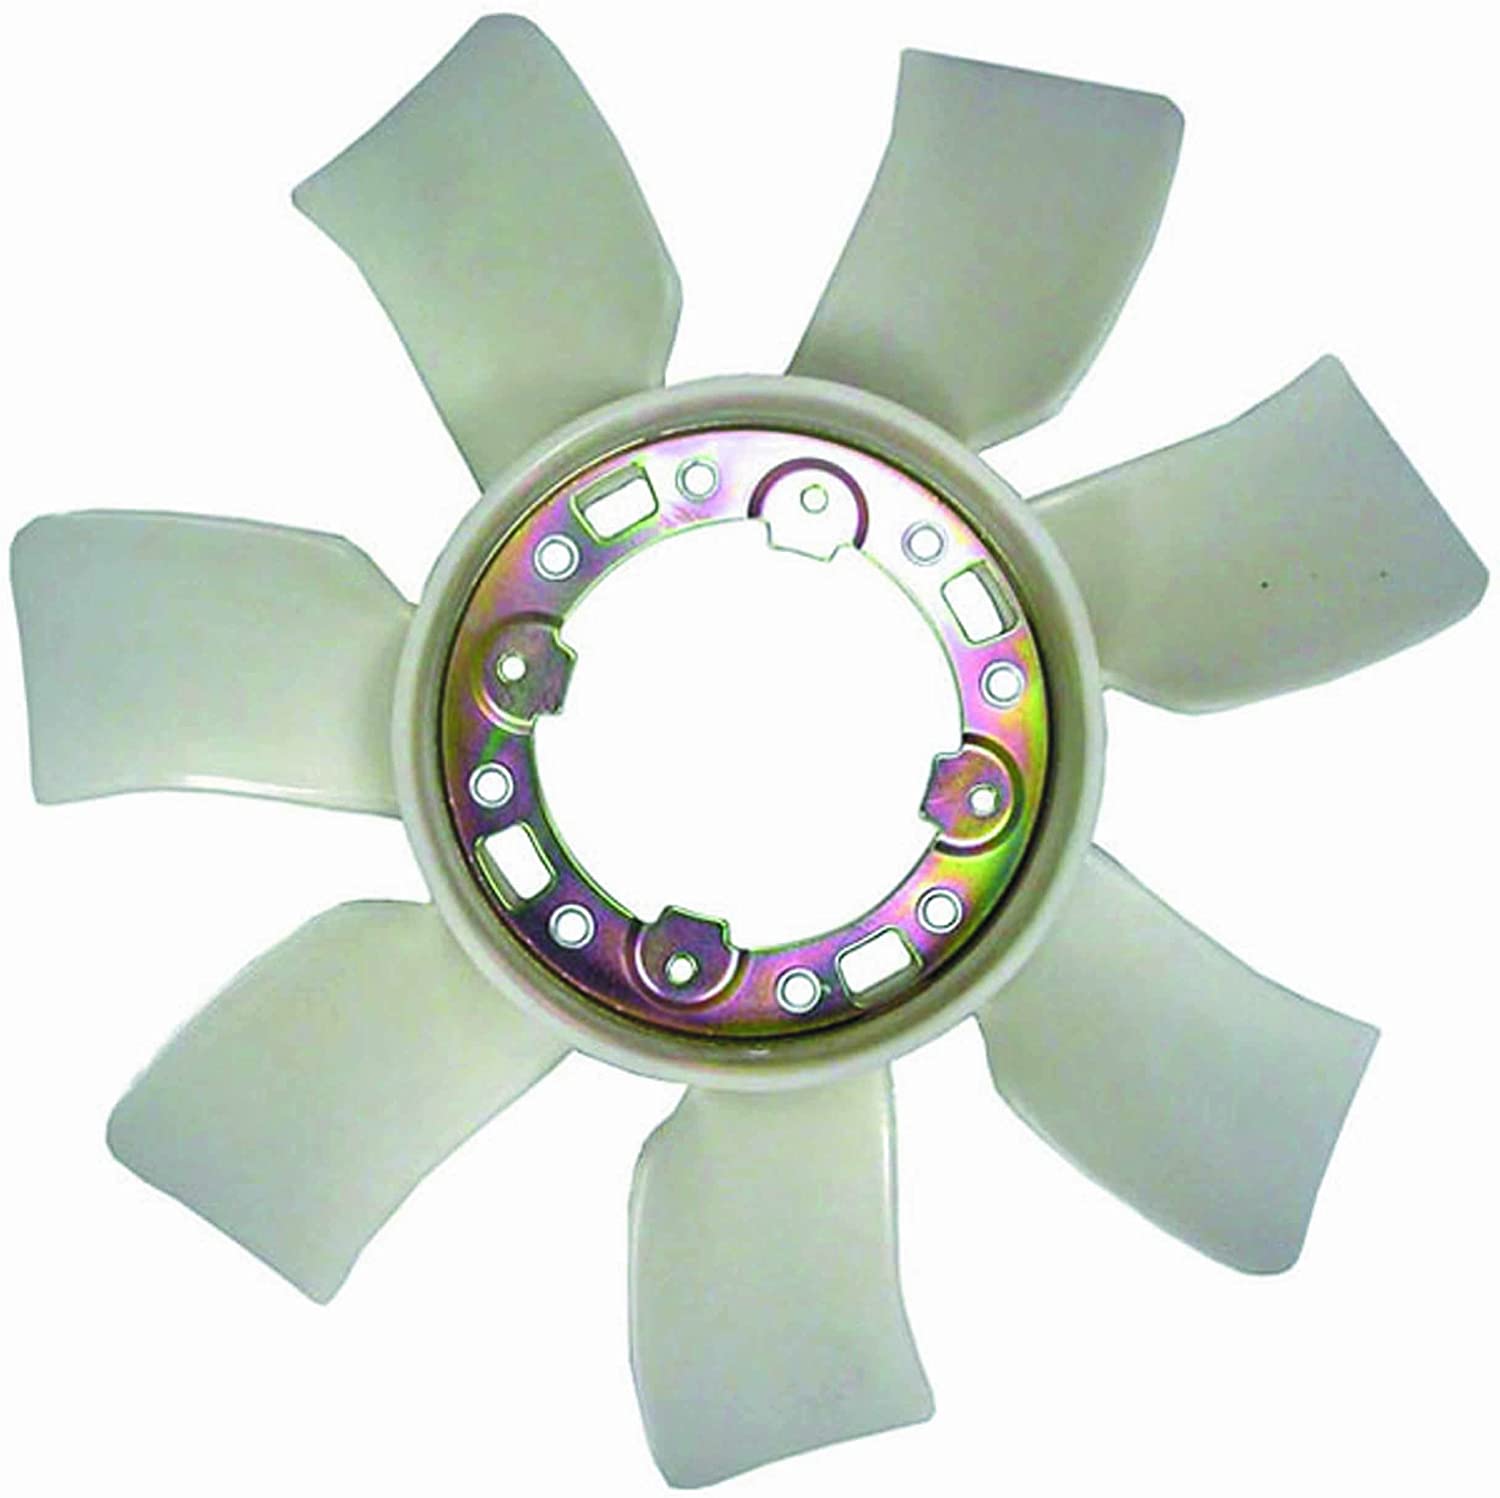 DEPO 312-55035-400 Replacement Engine Cooling Fan Blade (This product is an aftermarket product. It is not created or sold by the OE car company)